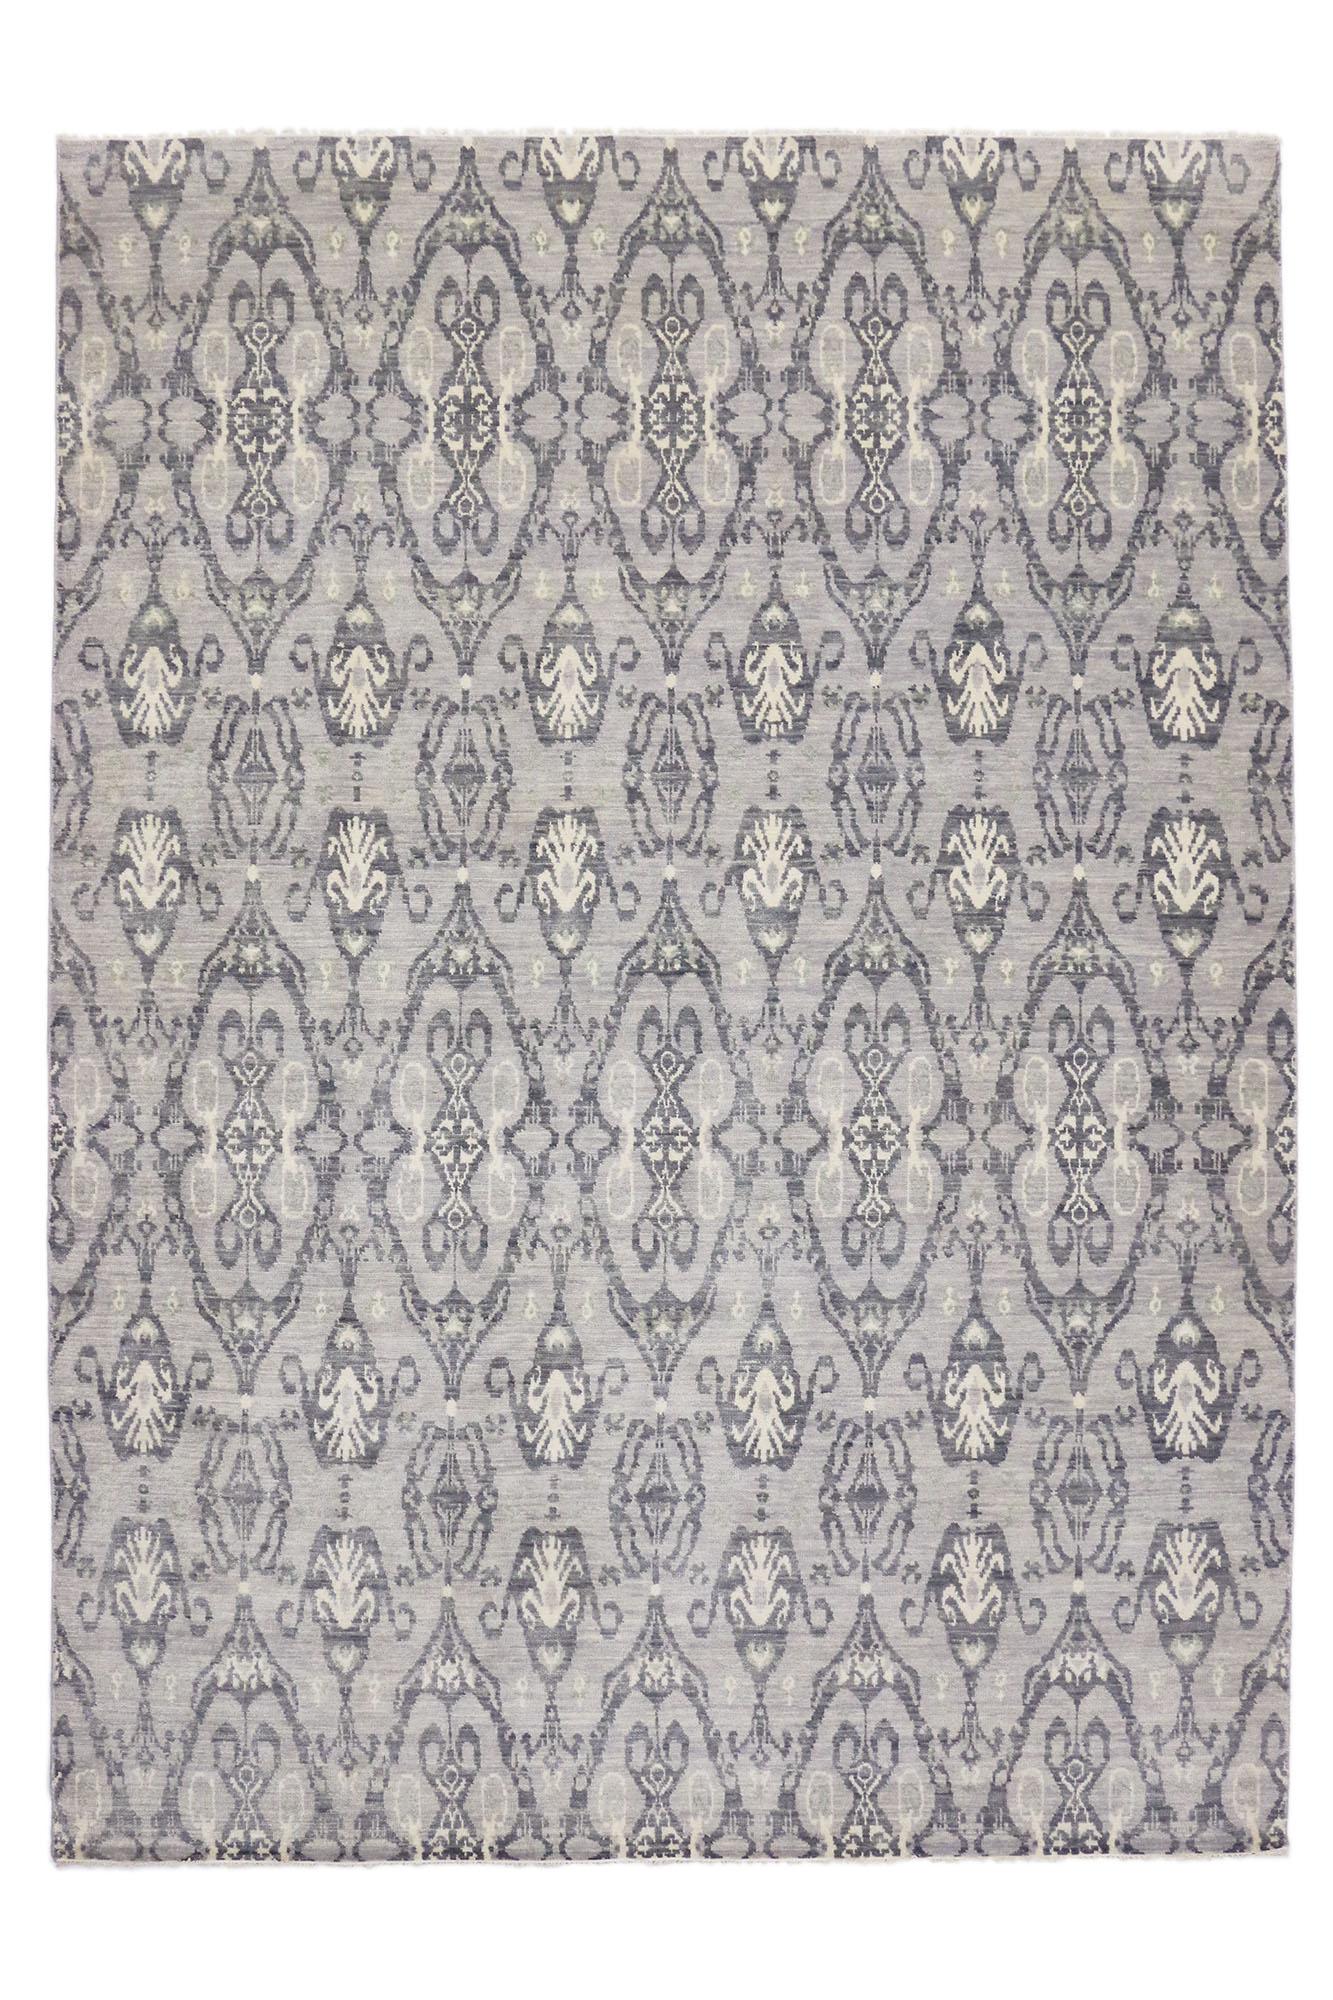 Contemporary Transitional Gray Damask Ikat Area Rug, Global Chic Meets Modern Elegance For Sale